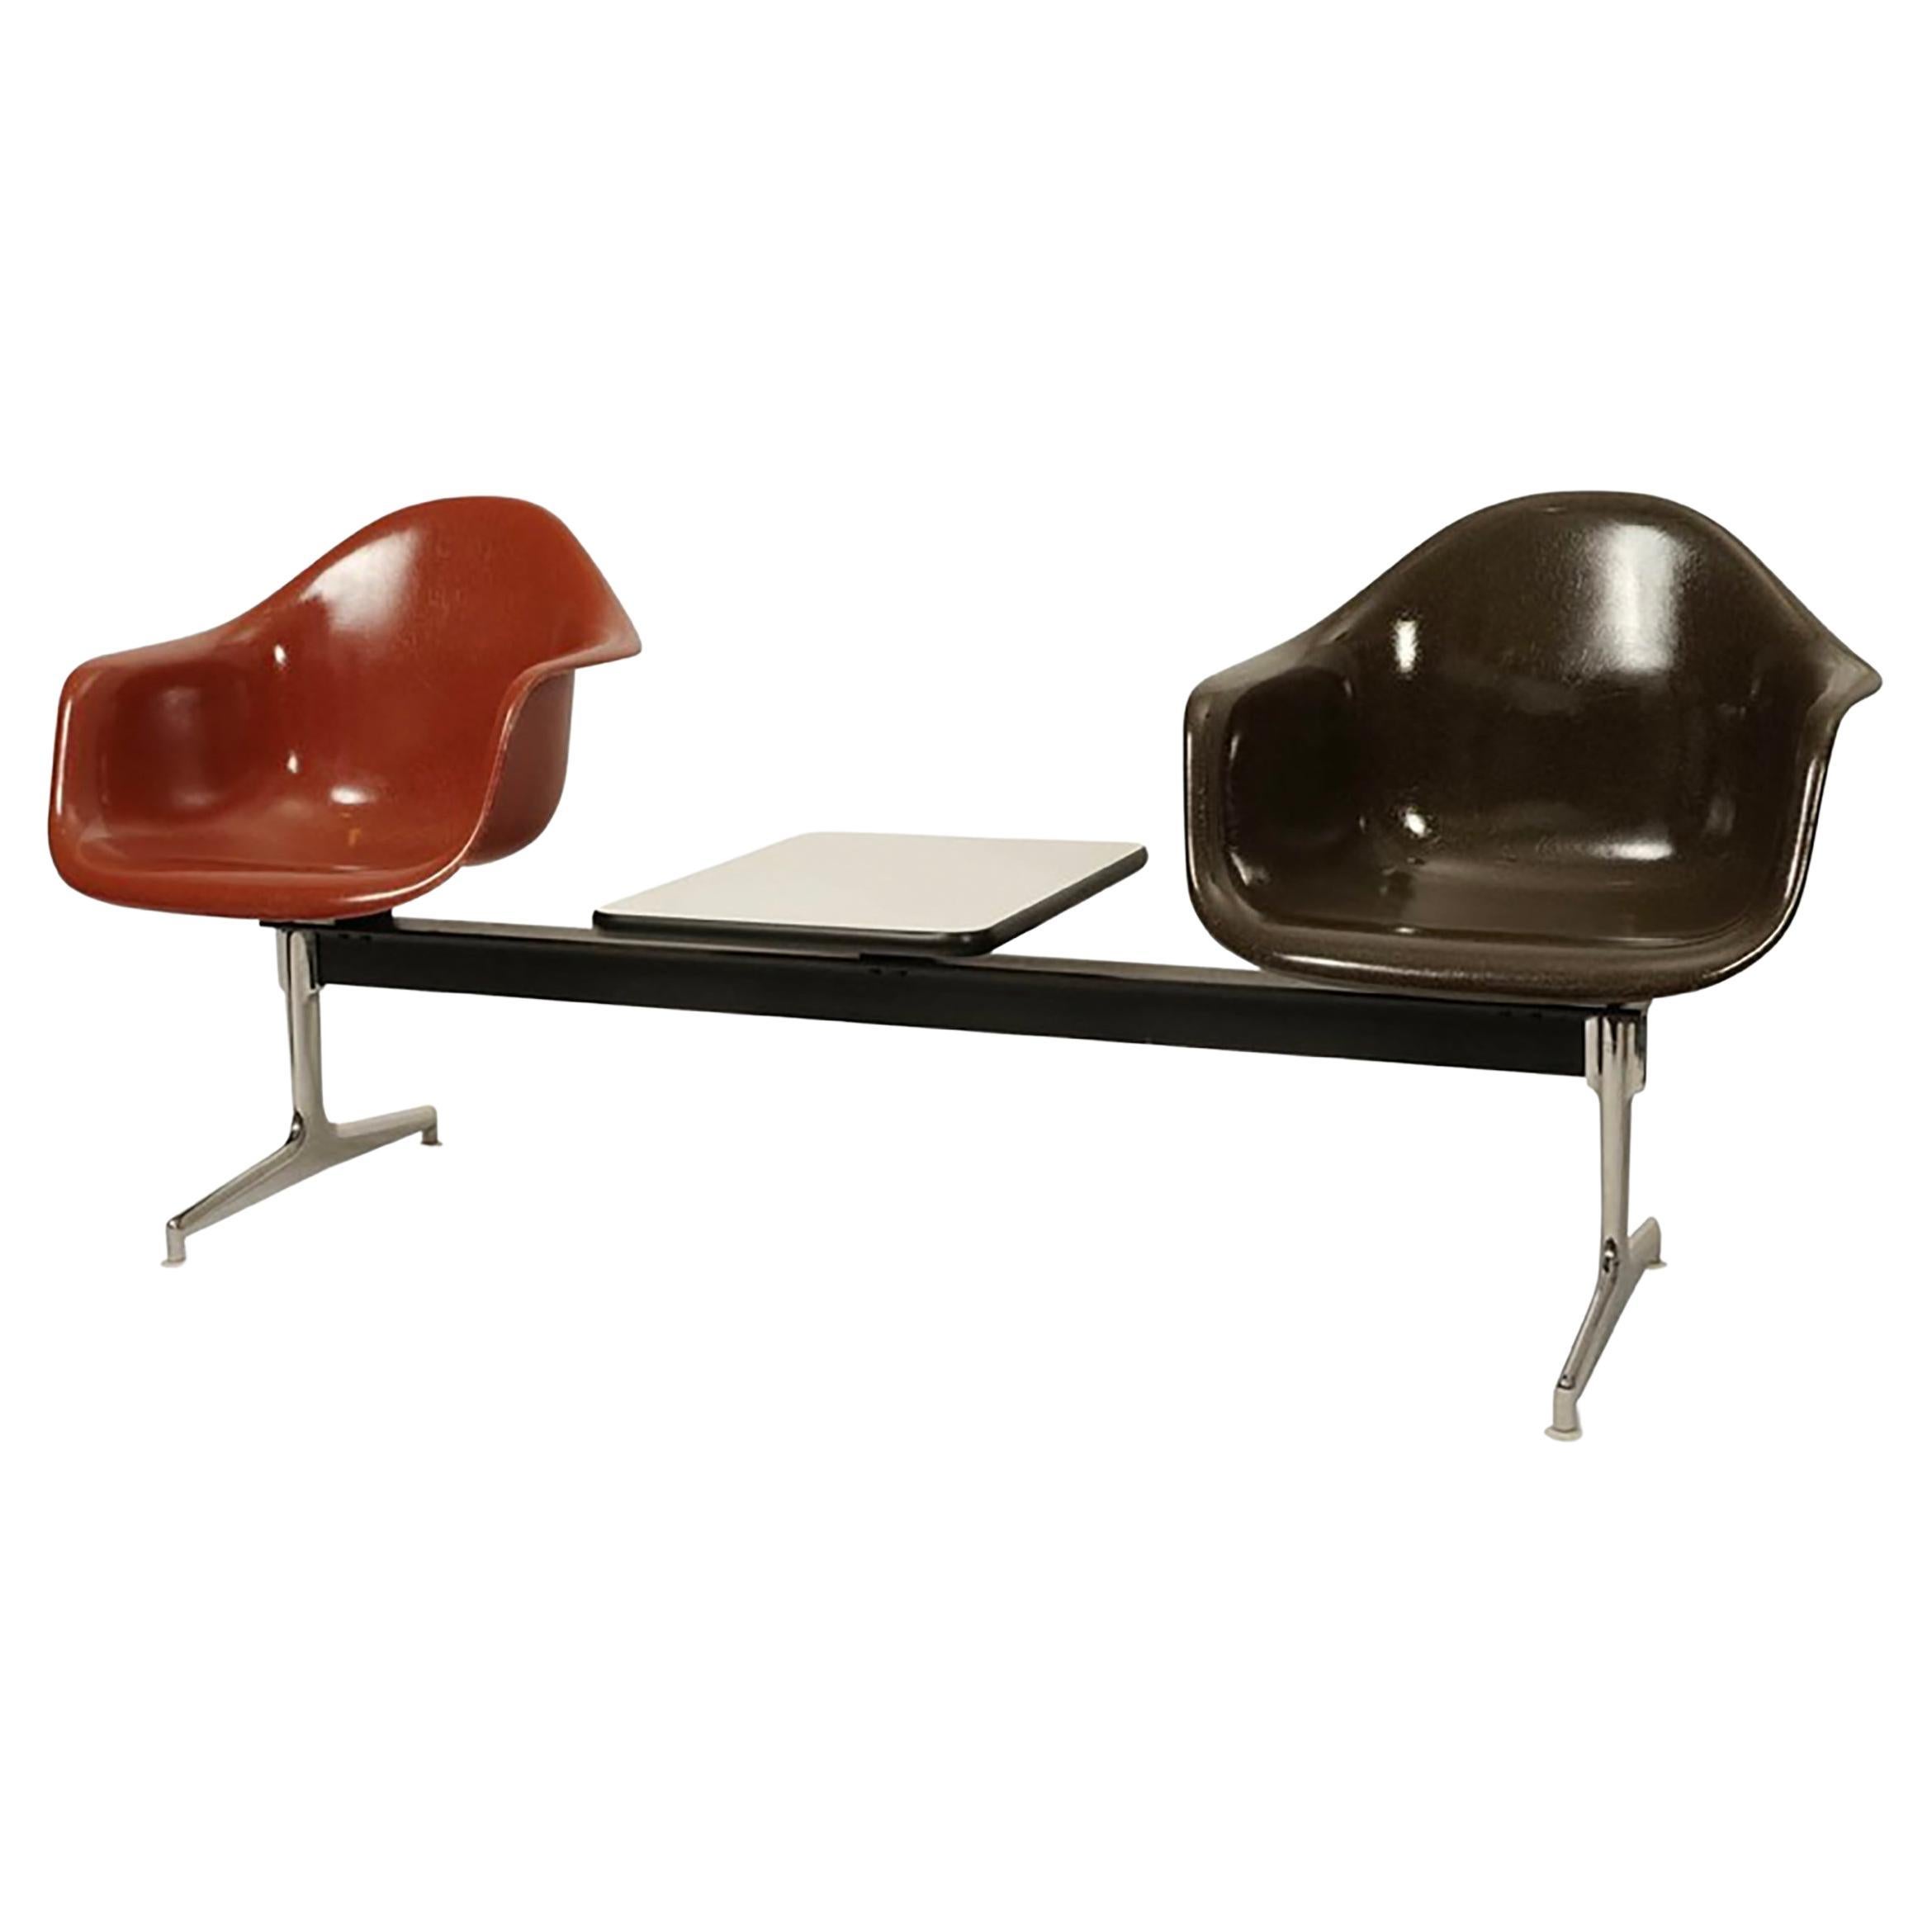 What was Charles and Ray Eames favorite wood?